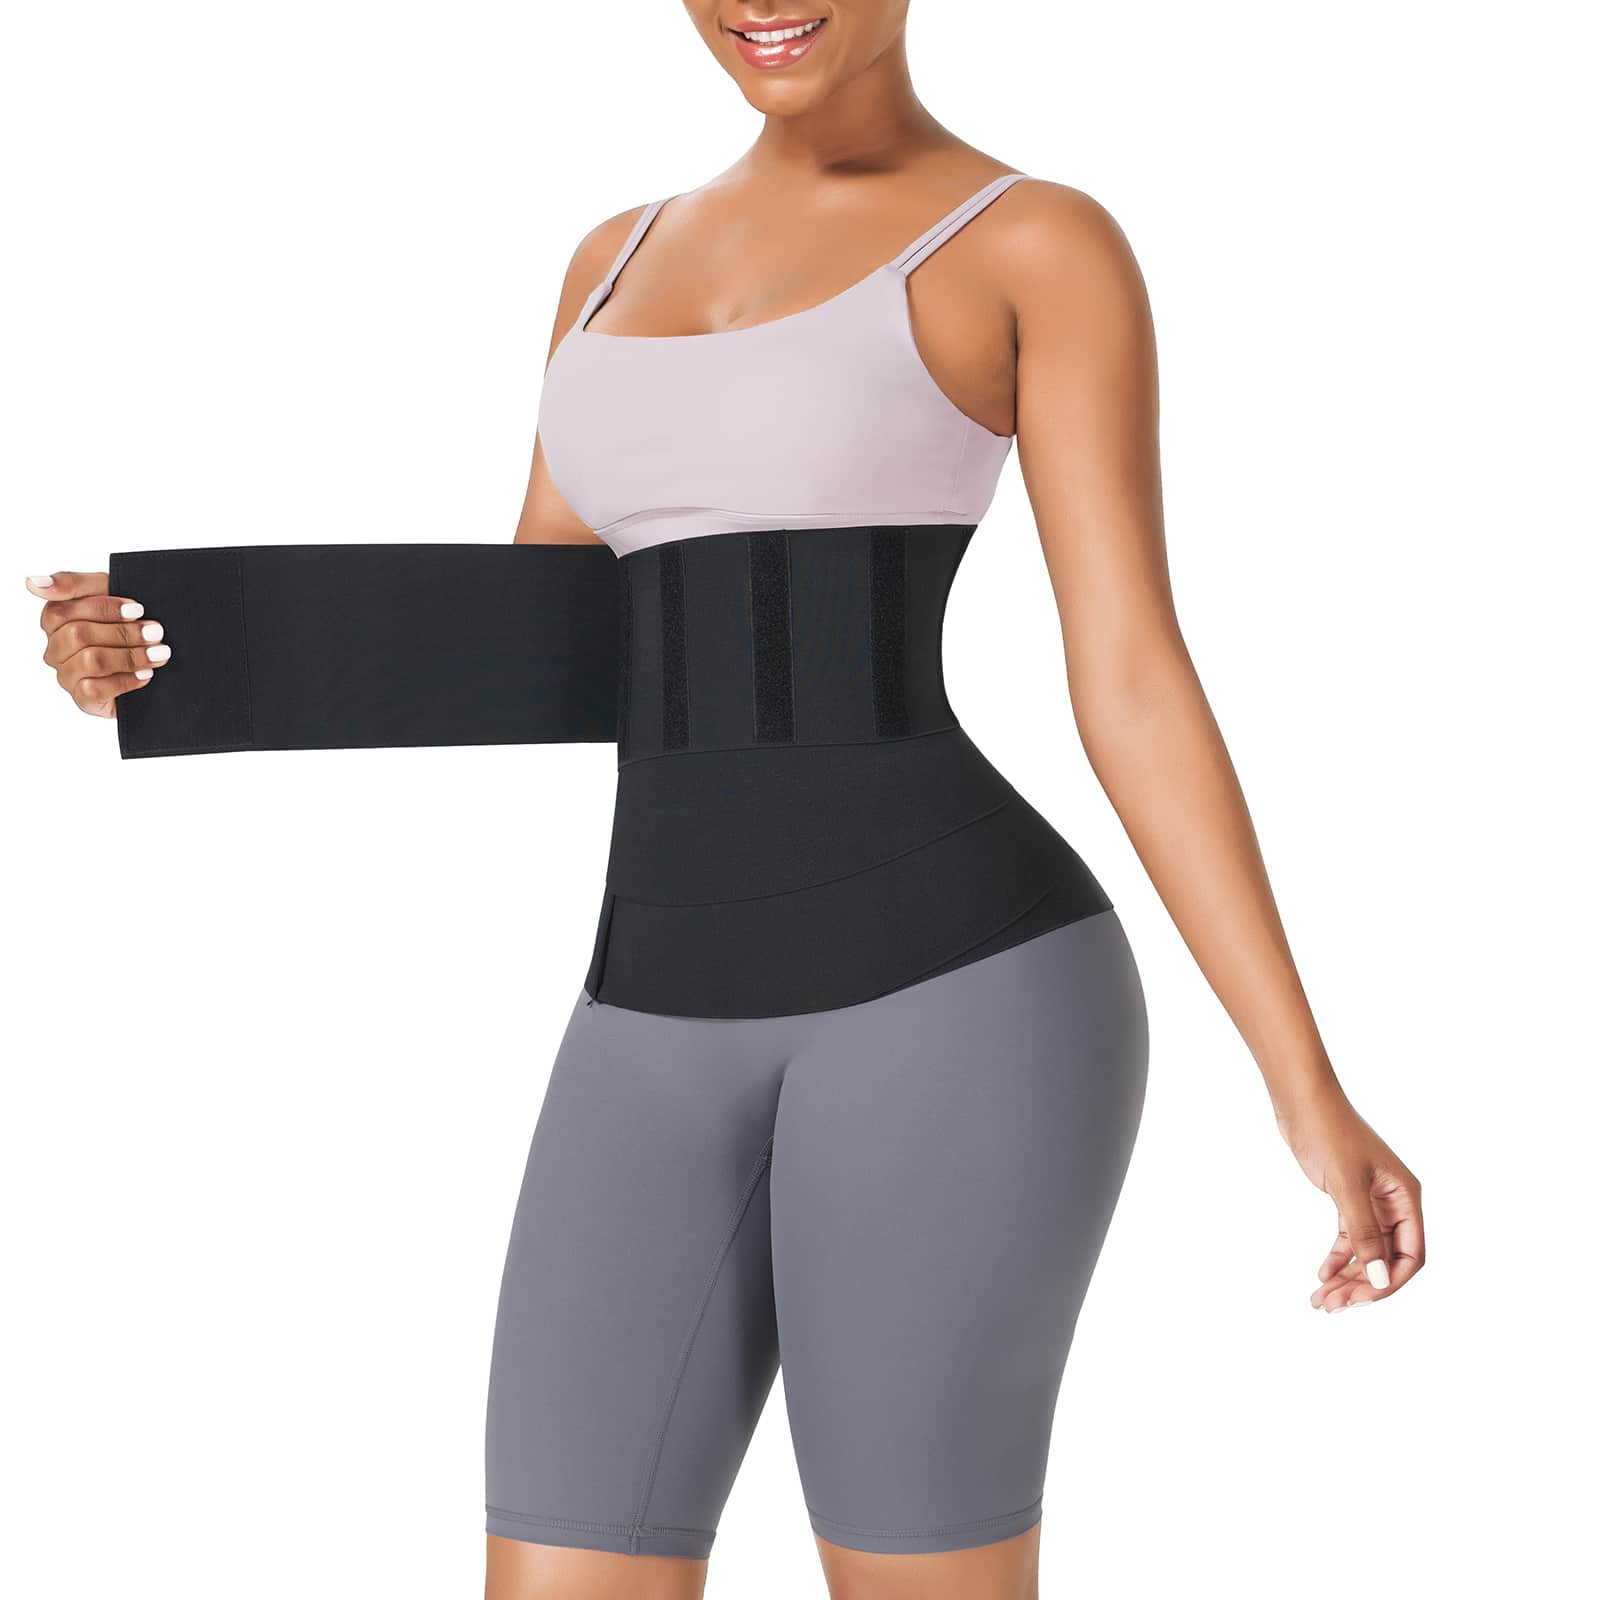 CAN YOU SLEEP IN A WAIST TRAINER?